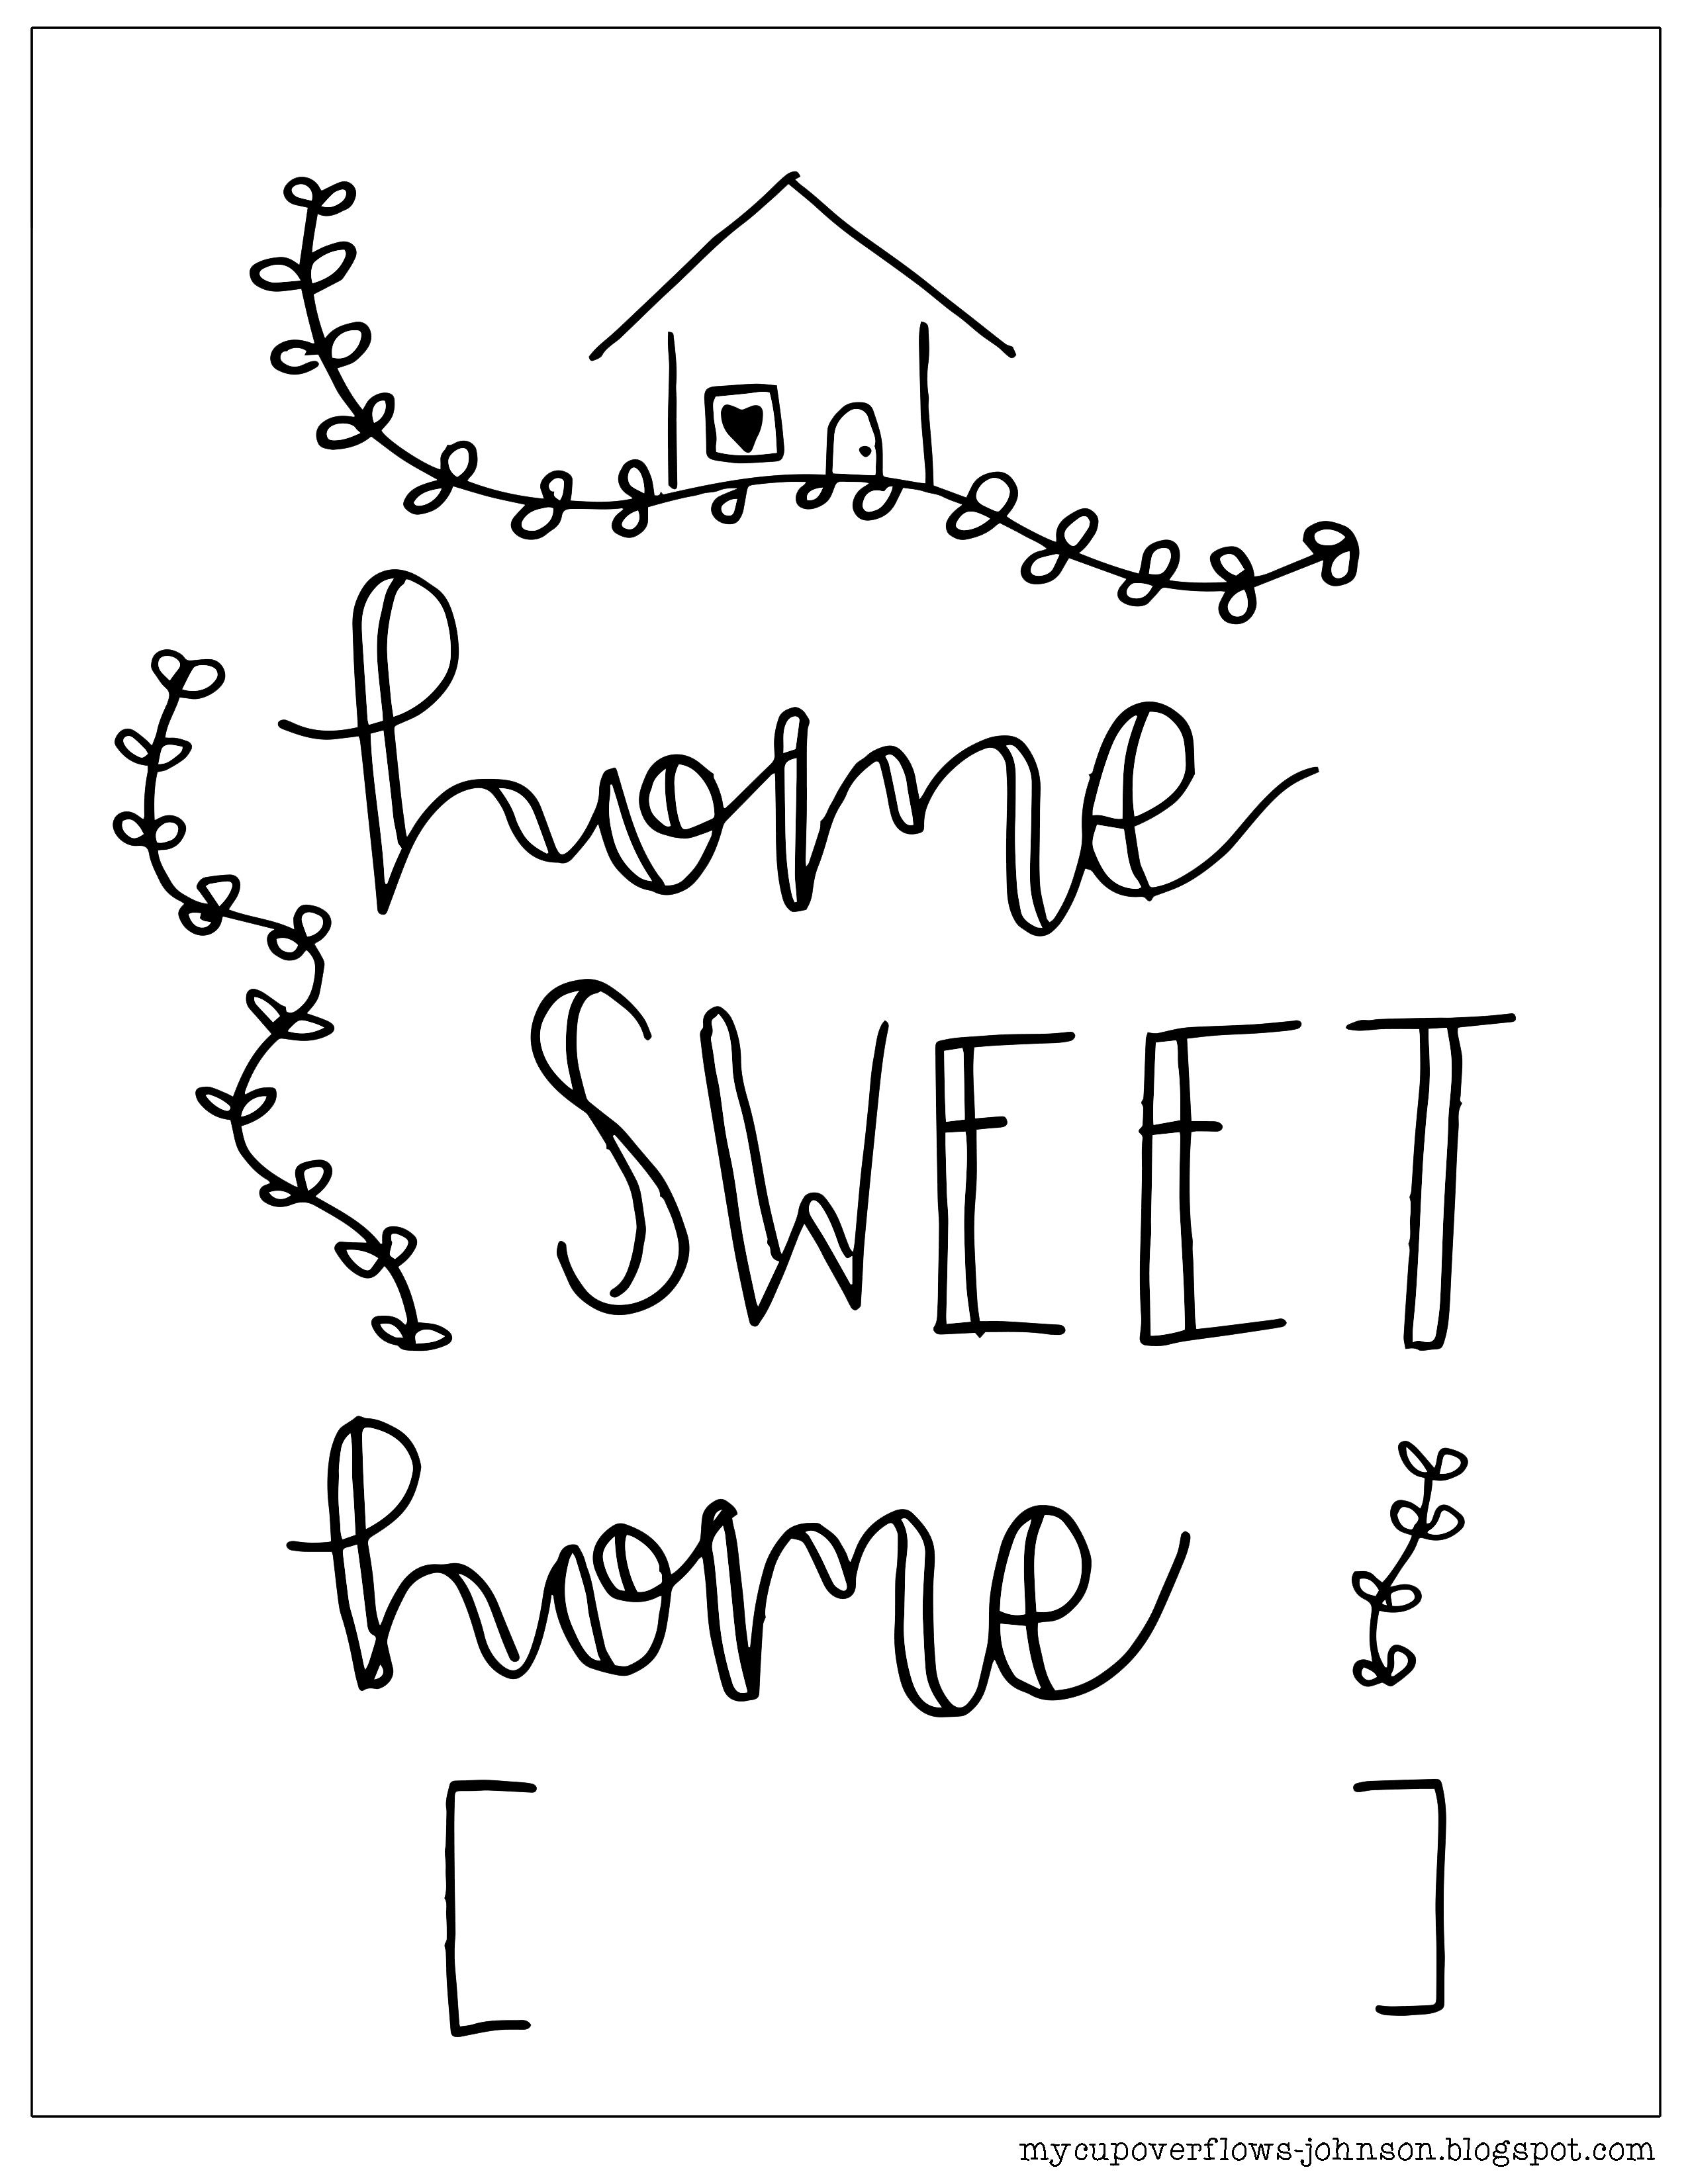 Home sweet home free printable coloring pages sweet home printable coloring pages